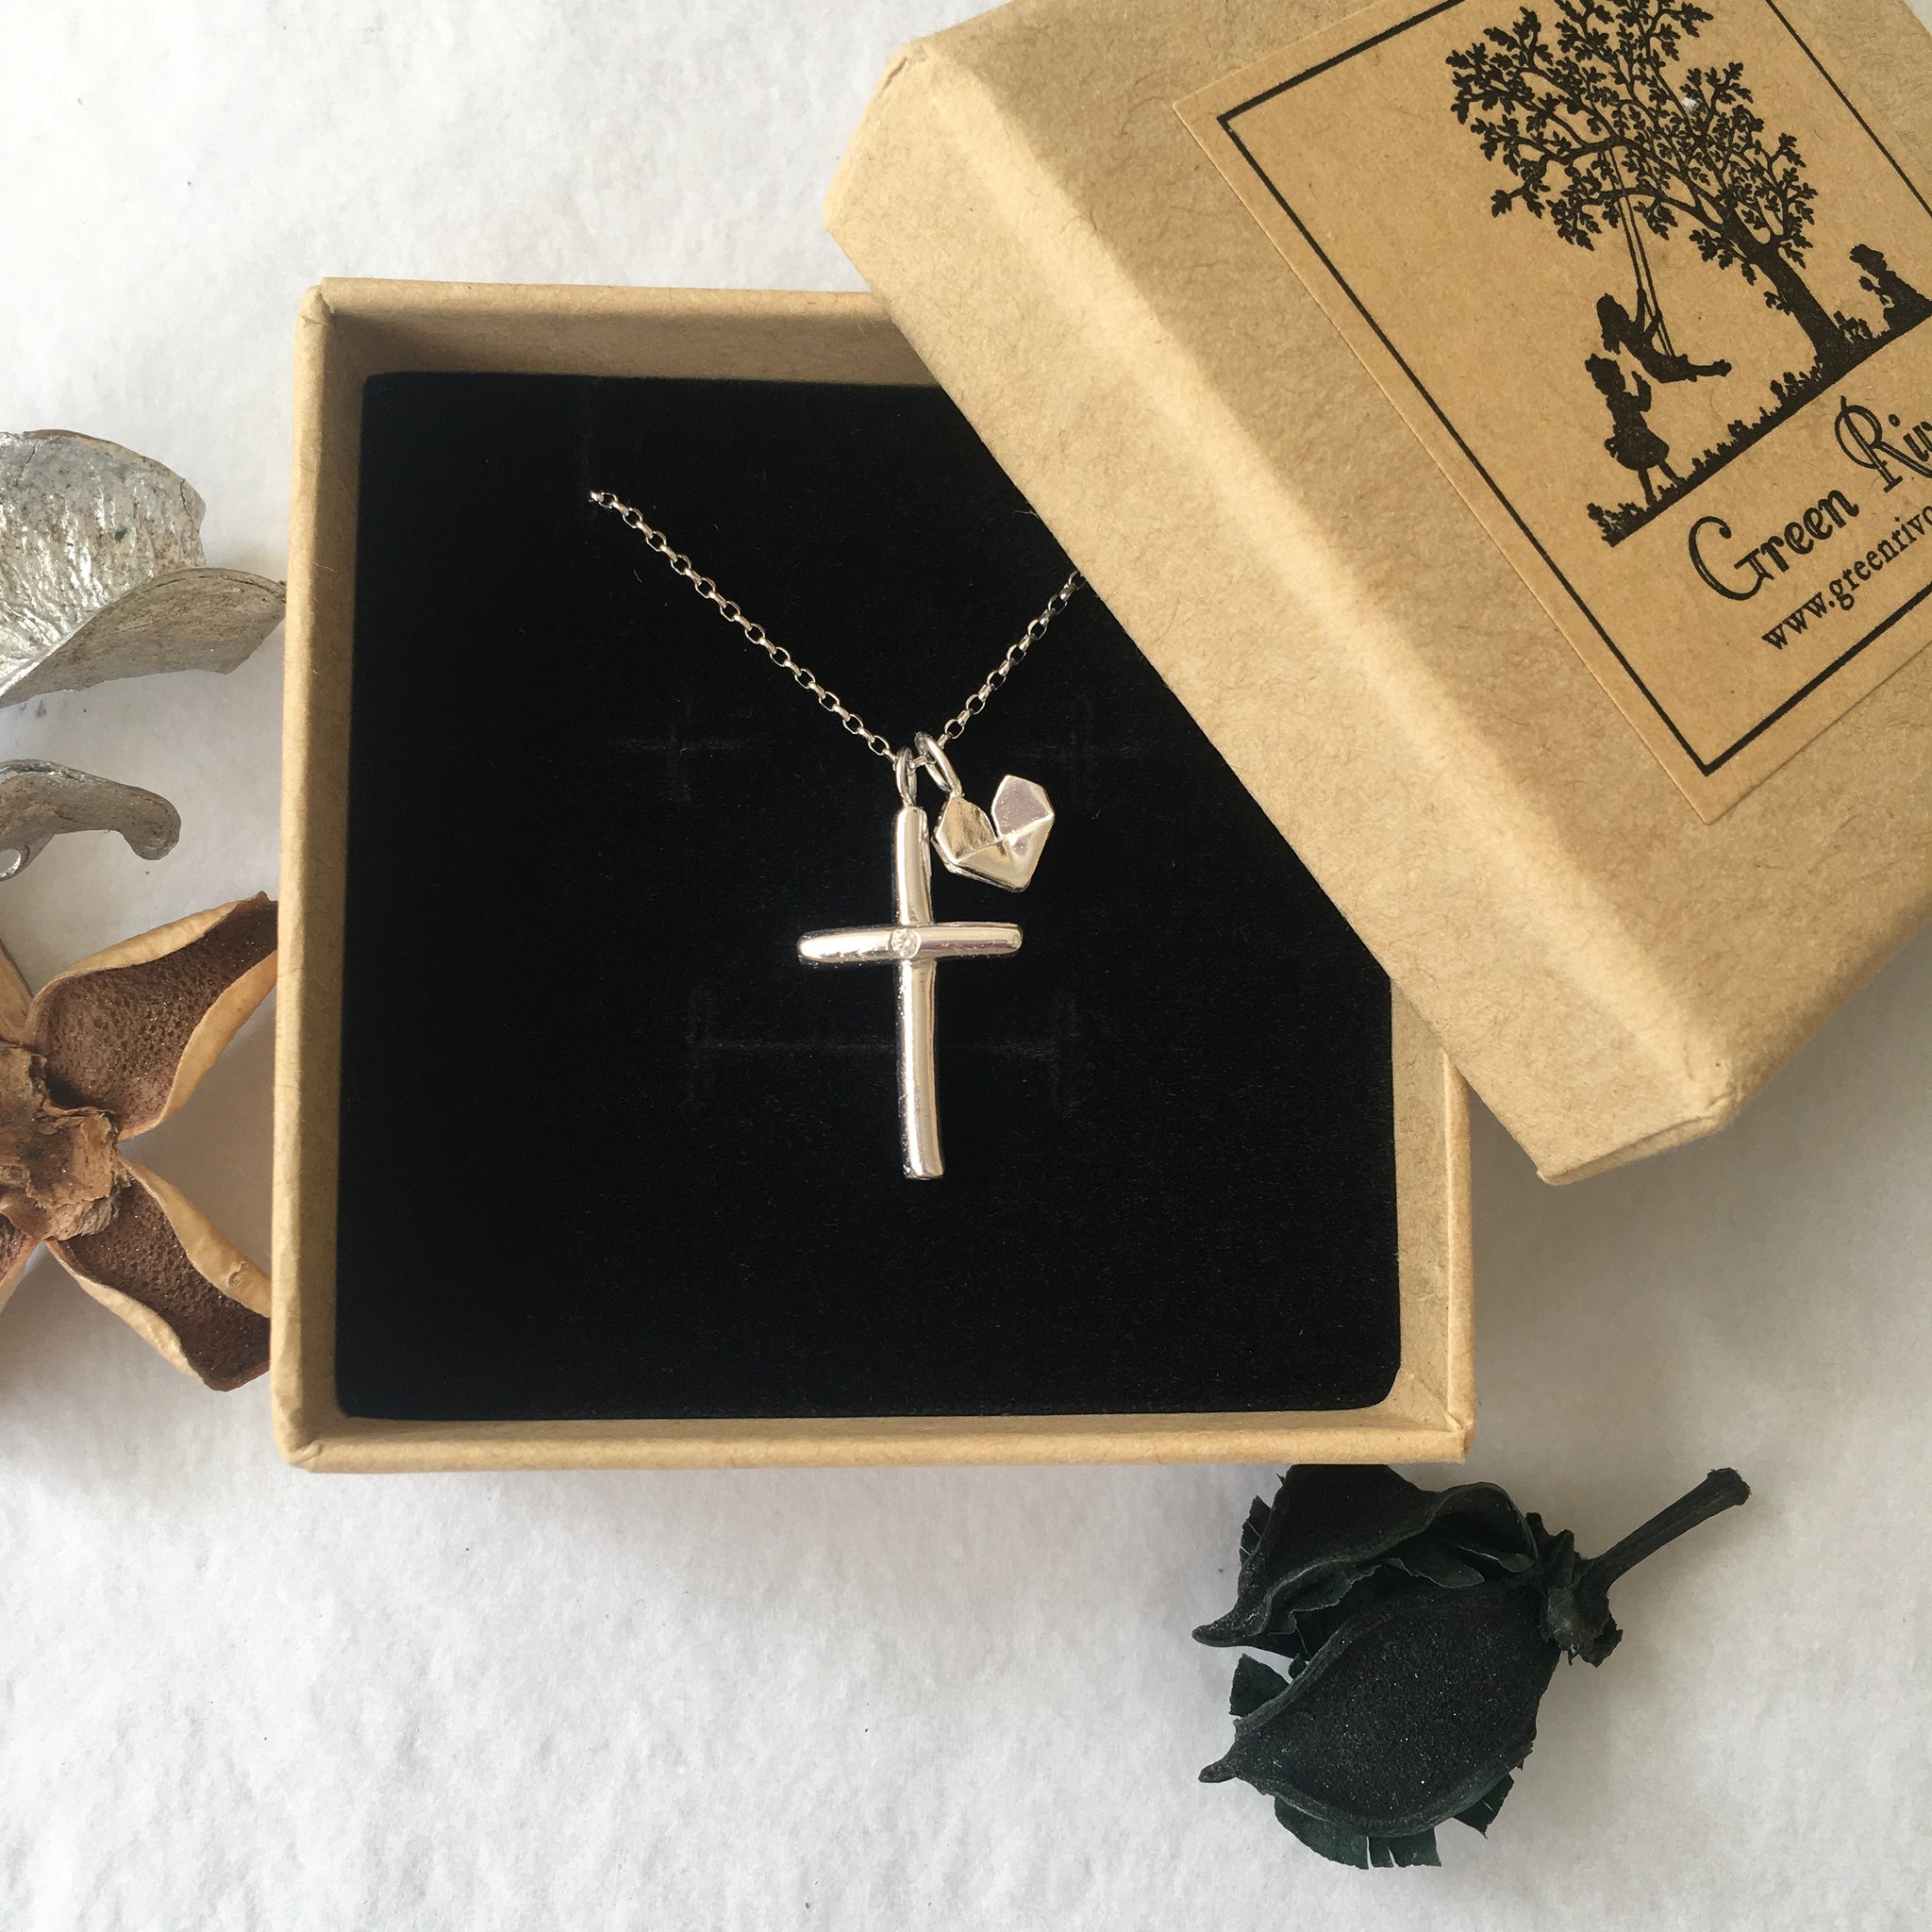 Cross with Heart - Sterling Silver Diamond Cross Necklace (Big) Plain or Engraved with Origami Heart